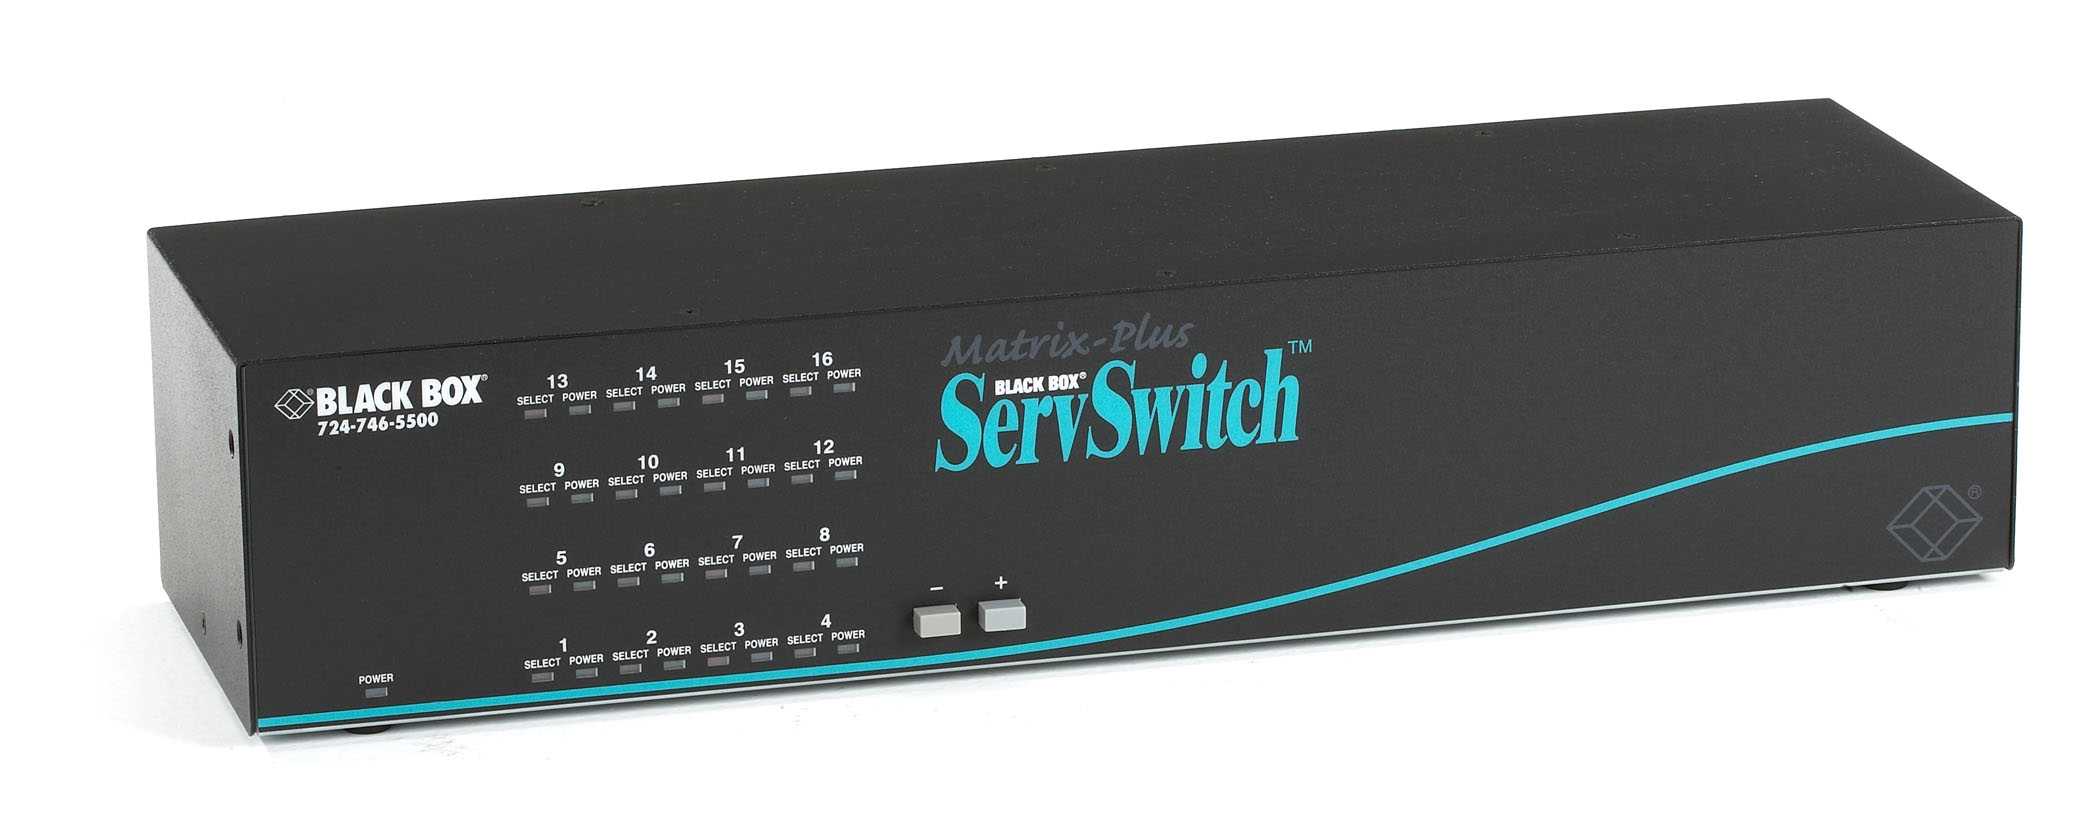 Black Box SW768A-R4 Multiplatform Matrix KVM Switch for PC and Sun 4 Users  x 8 CPUs